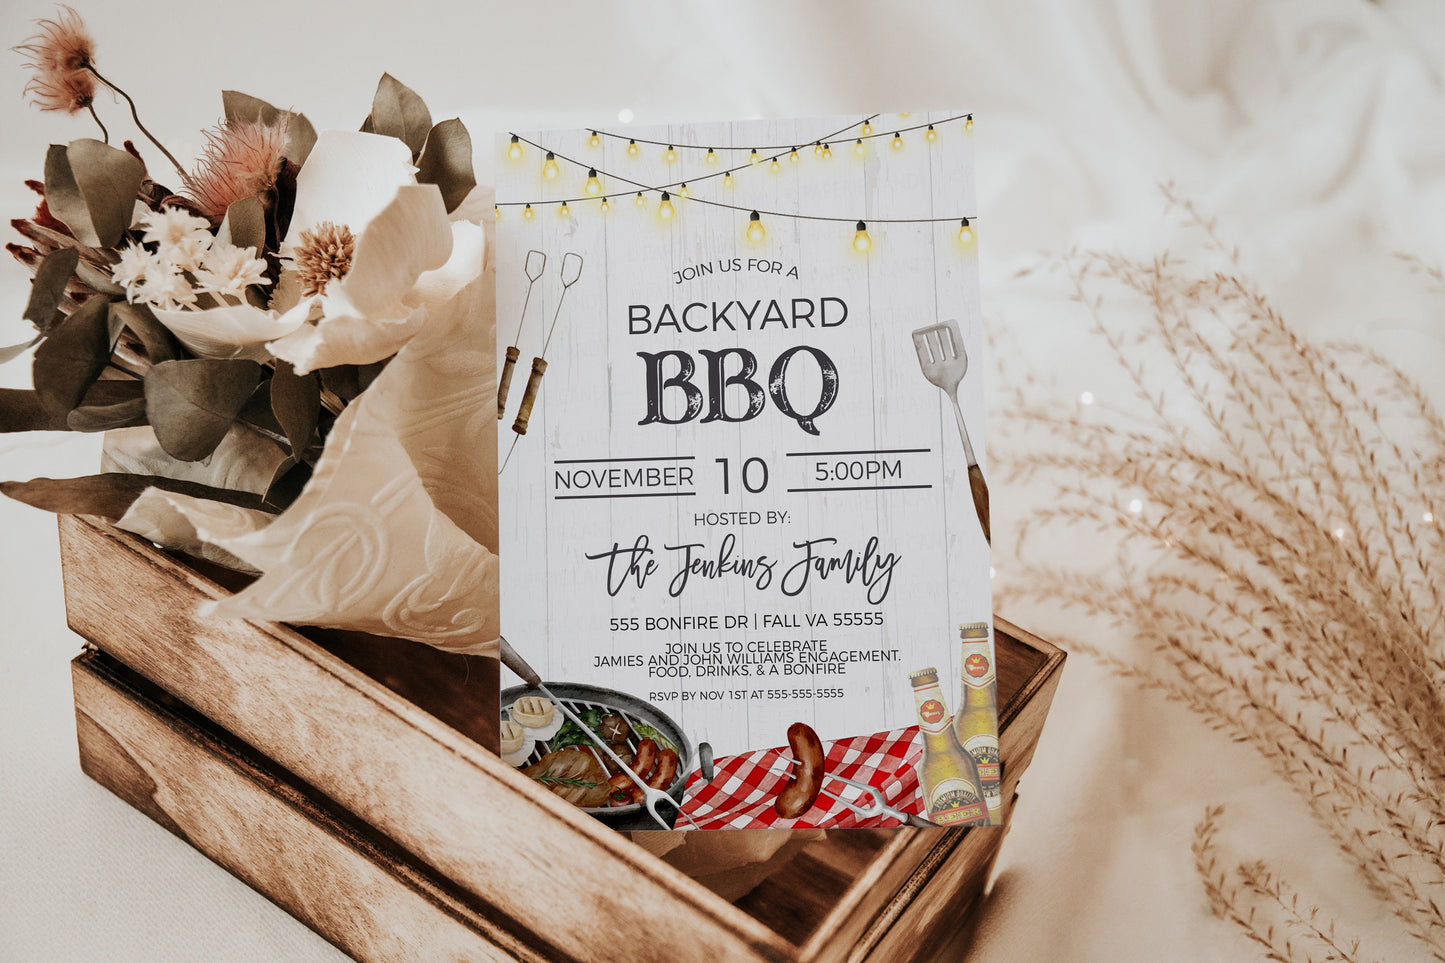 Backyard BBQ Invitation, Barbeque Burgers Beer Invite, Grilling Cookout Barbecue Party, Fall Summer Event Shower Editable Printable Template